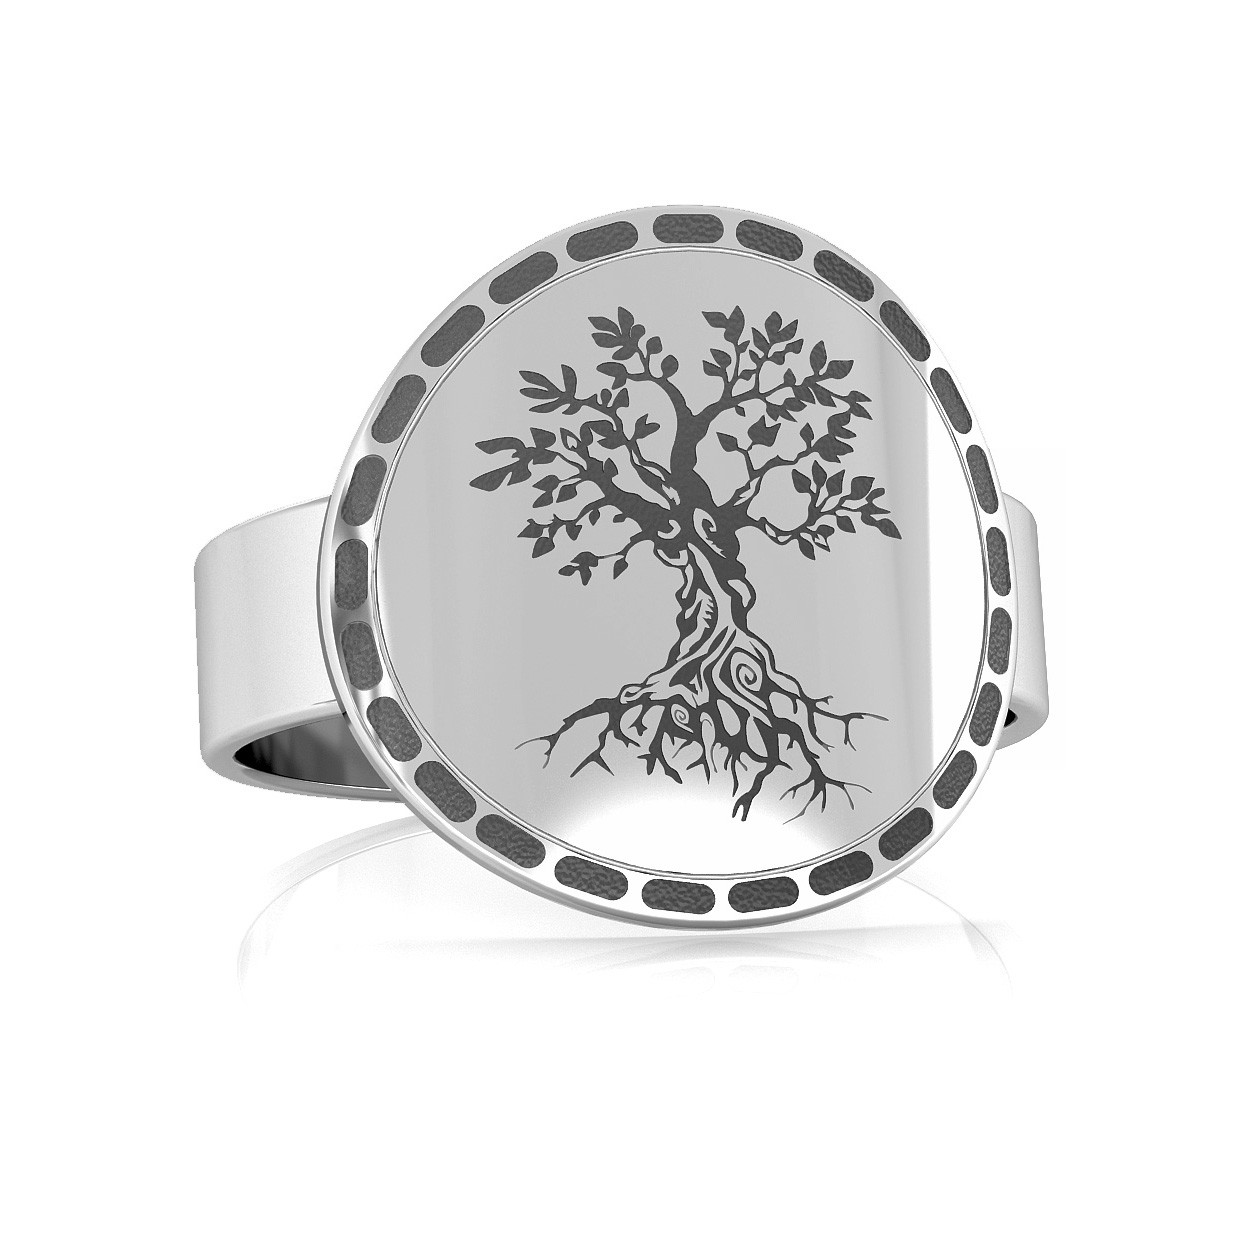 Moon signet, sterling silver 925